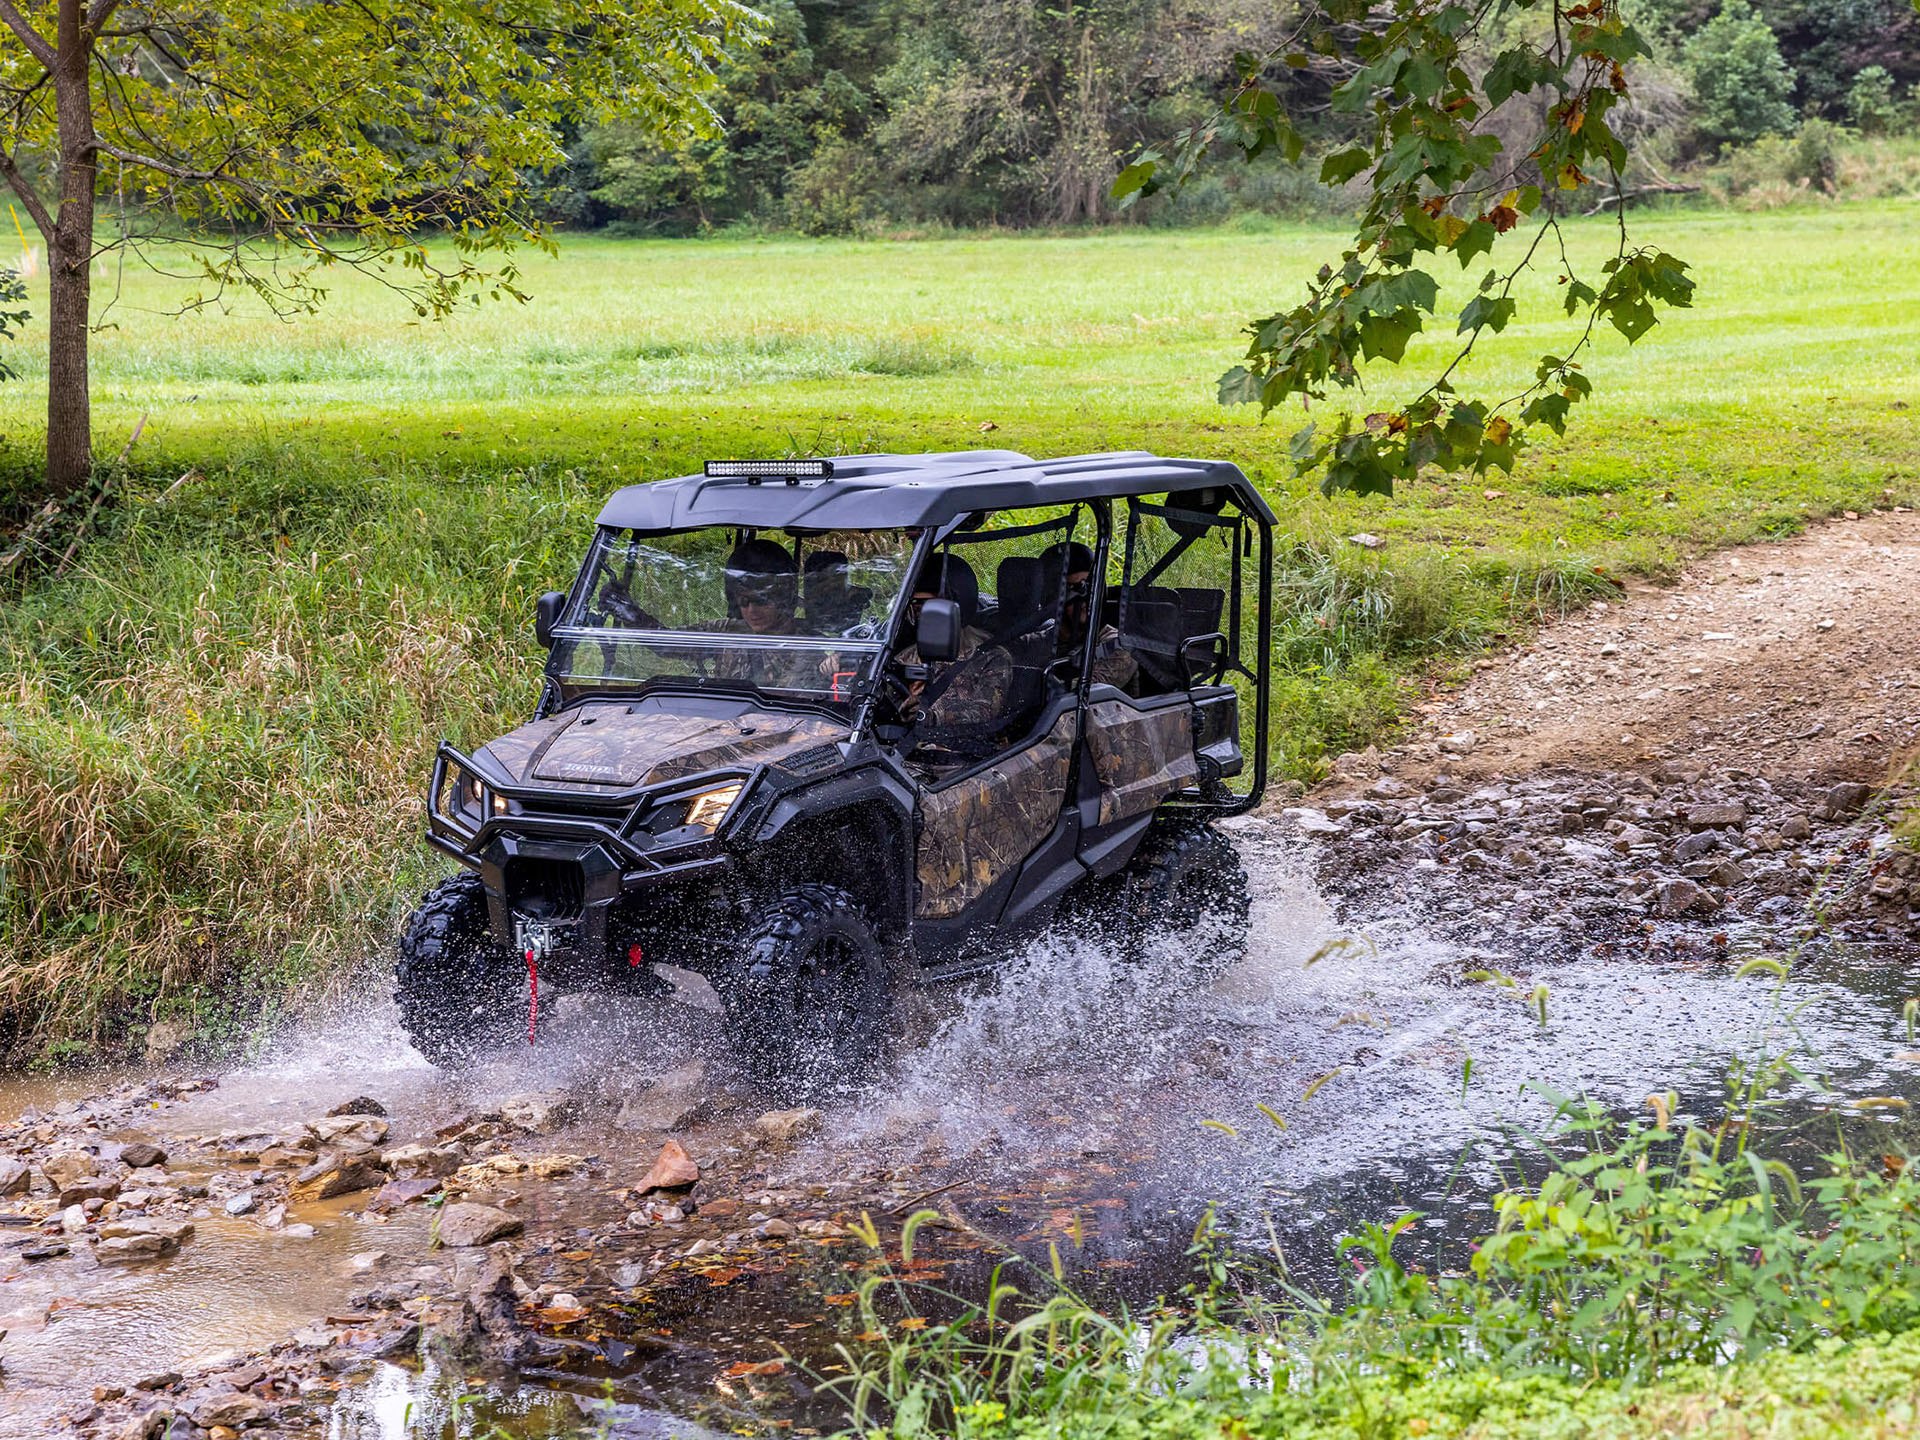 2023 Honda Pioneer 1000-5 Trail in Greeneville, Tennessee - Photo 10